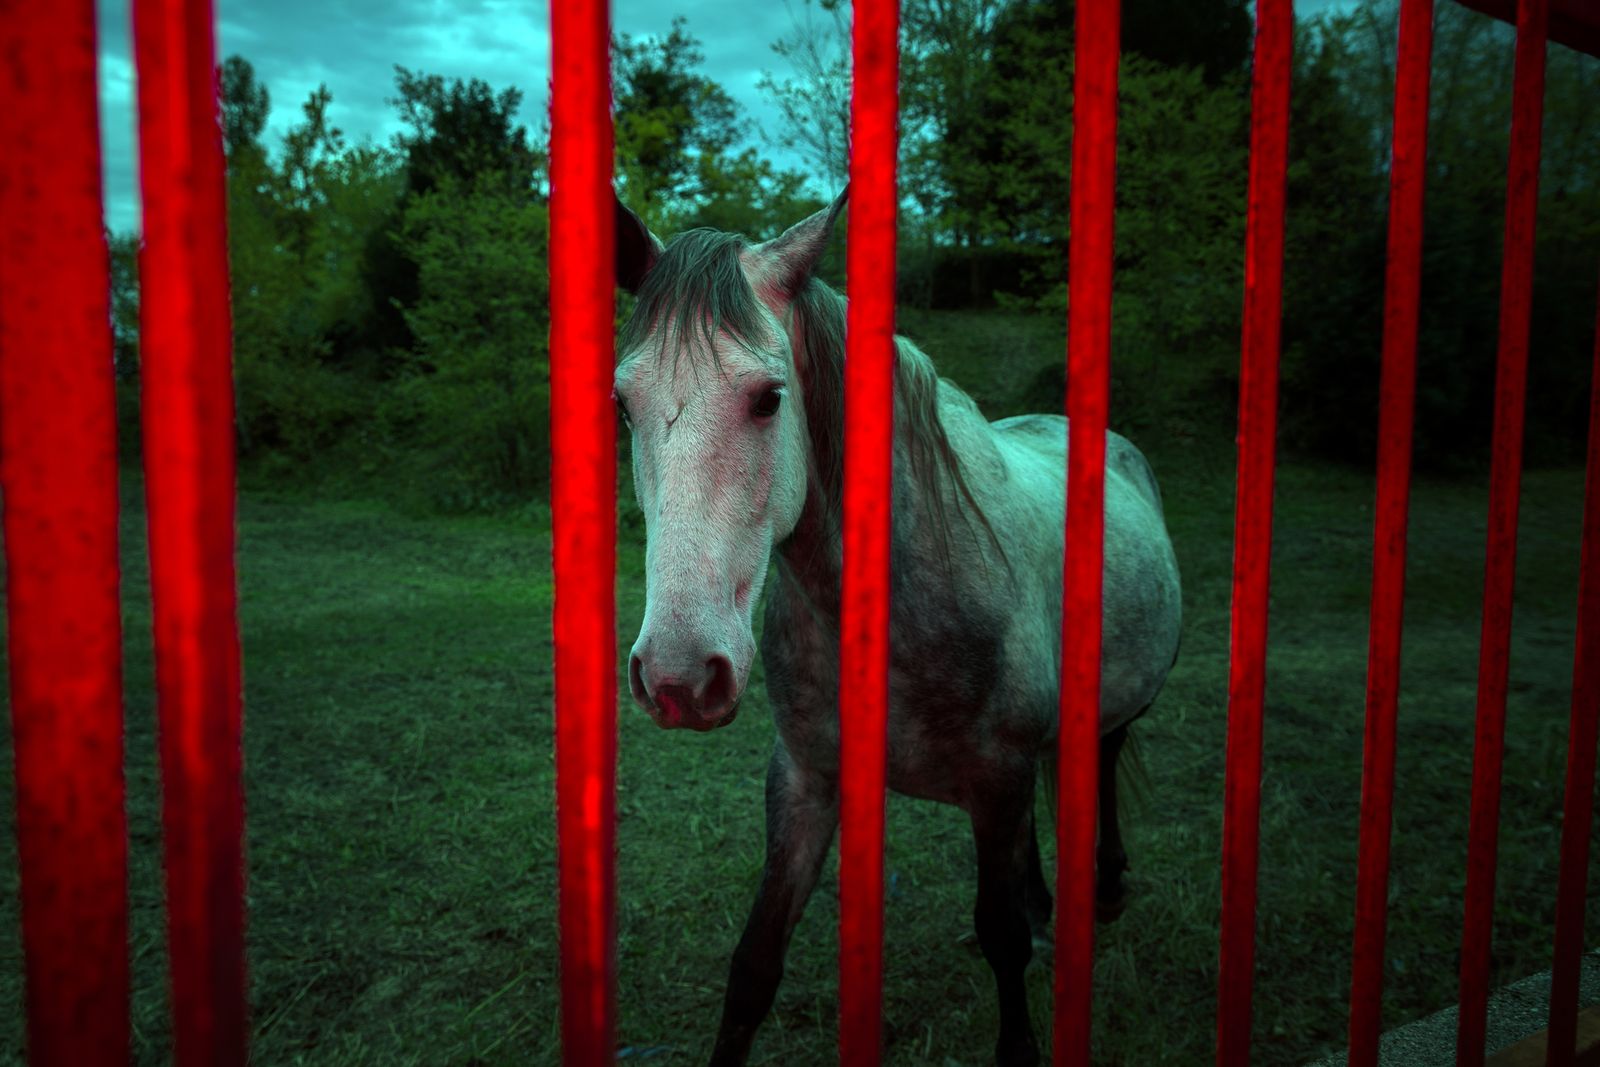 © Filippo Venturi - A horse inside a private land bordered by iron bars. Antrona Valley, Italy, 2021.